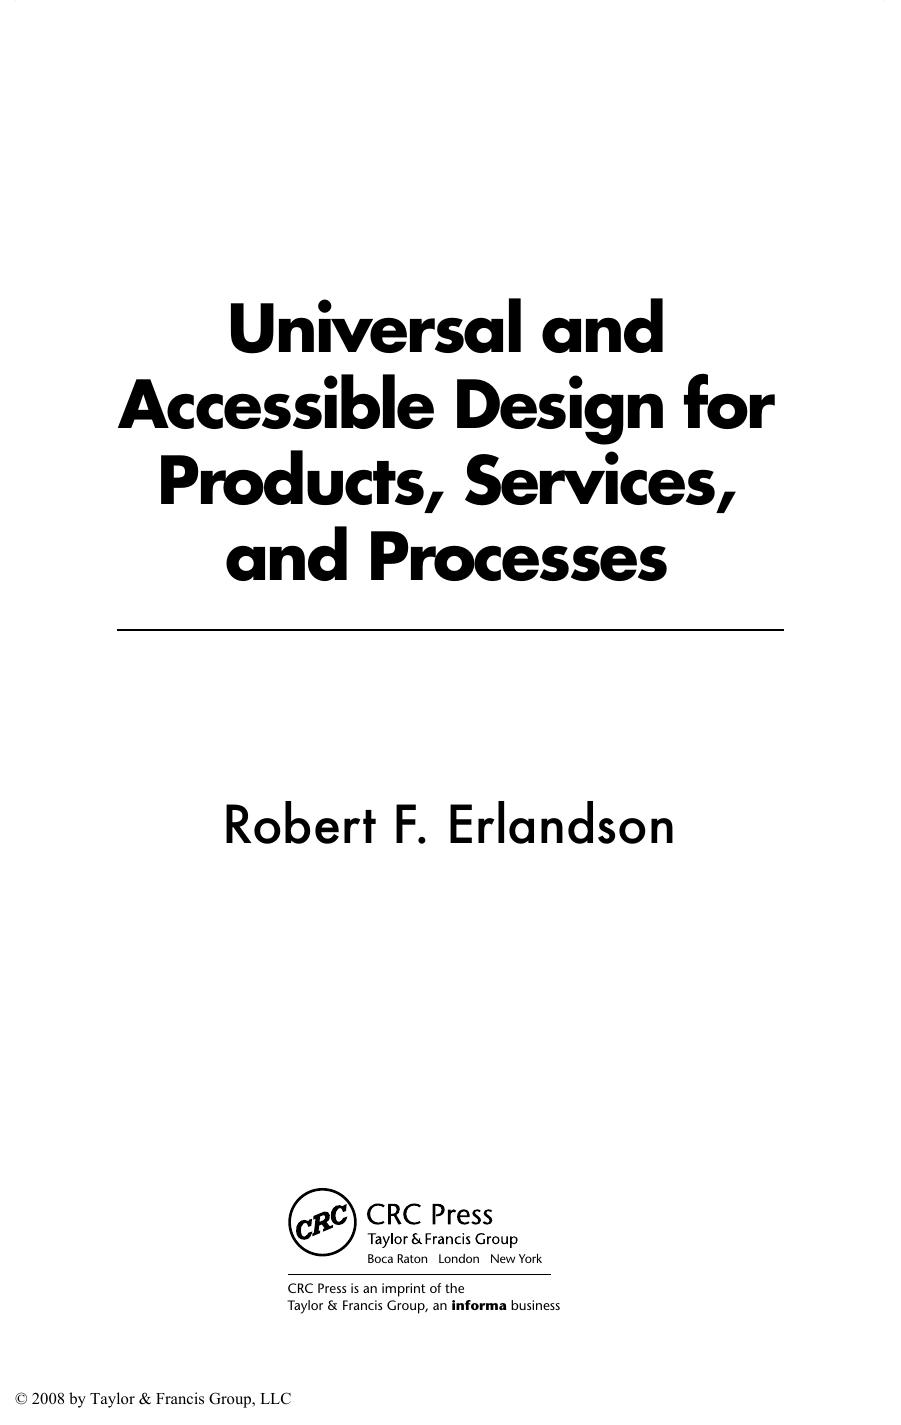 Robert F. Erlandson Universal and Accessible Design for Products, Services, and Processes 2007